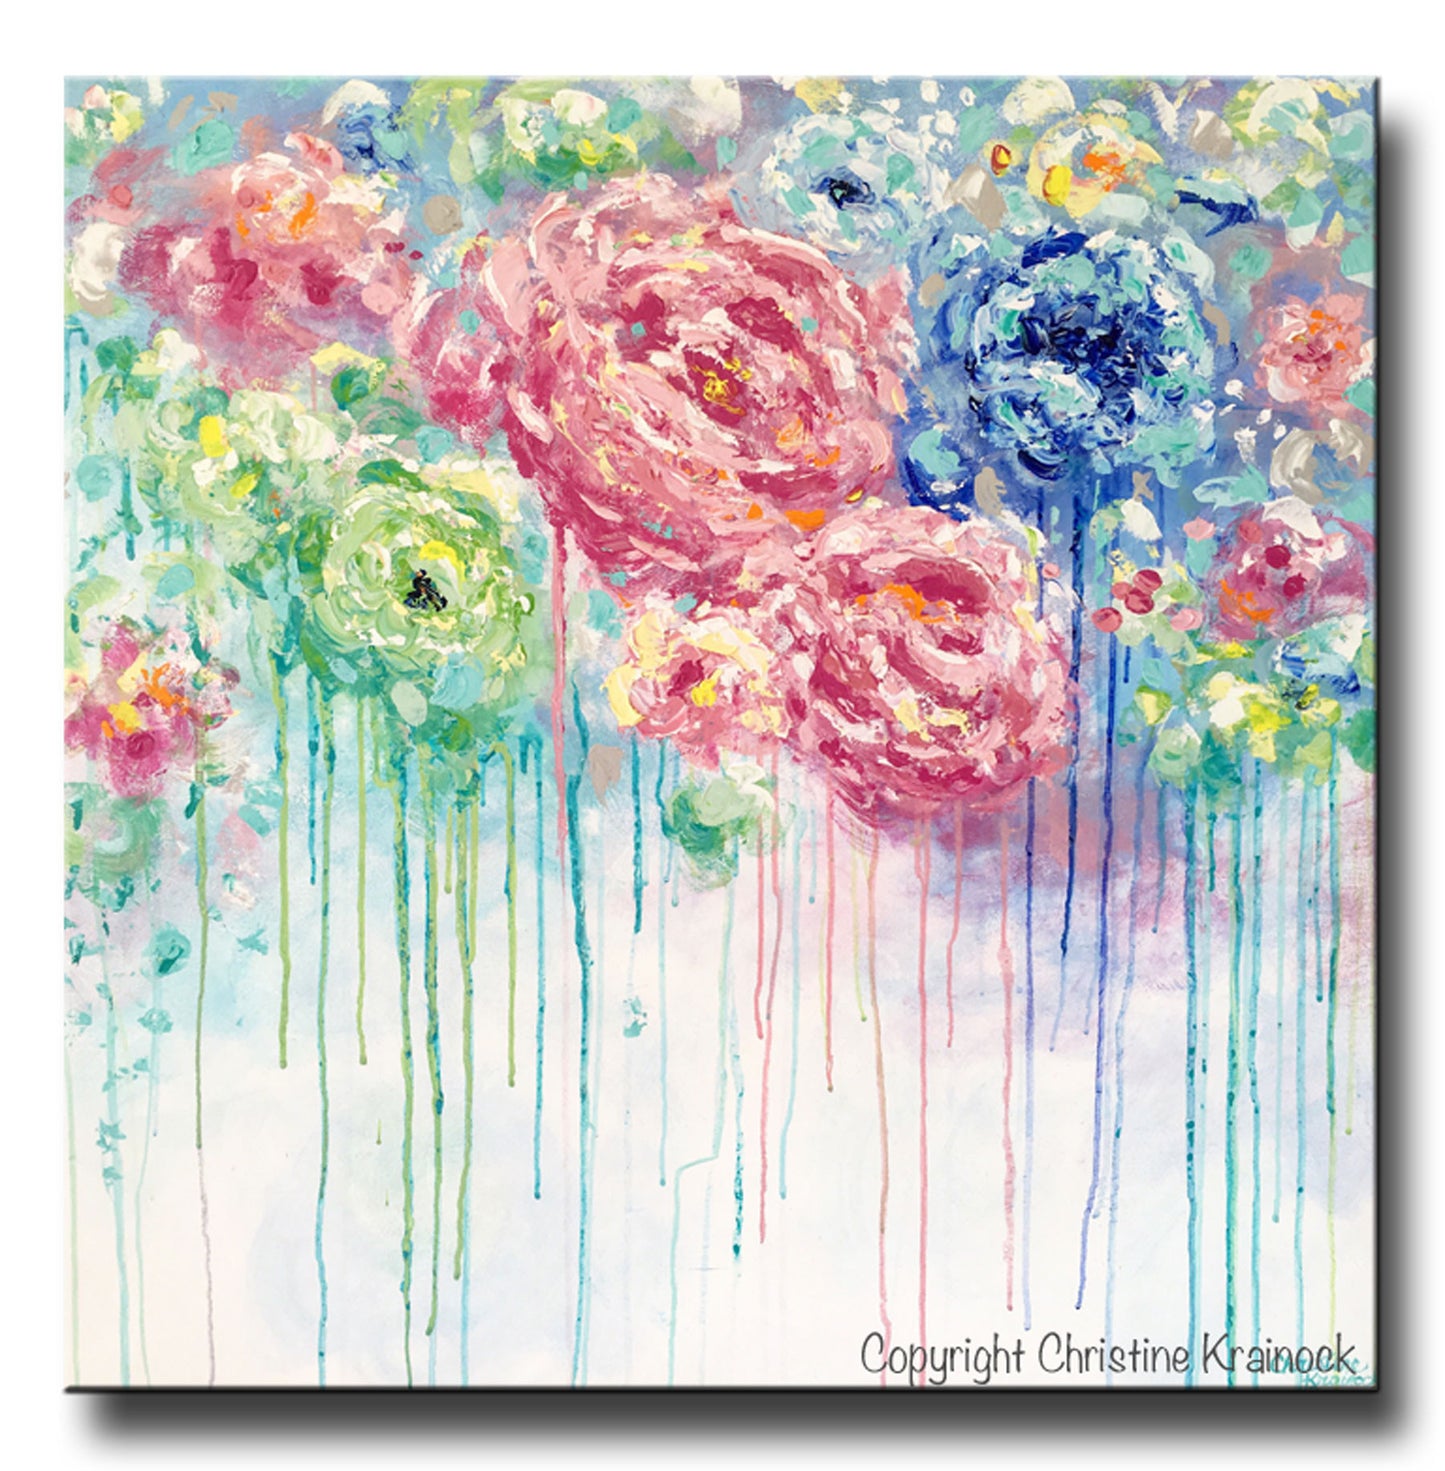 ORIGINAL Art Abstract Painting Flowers Blue White Pink Floral Textured XL Wall Art Colorful Peonies - Christine Krainock Art - Contemporary Art by Christine - 3